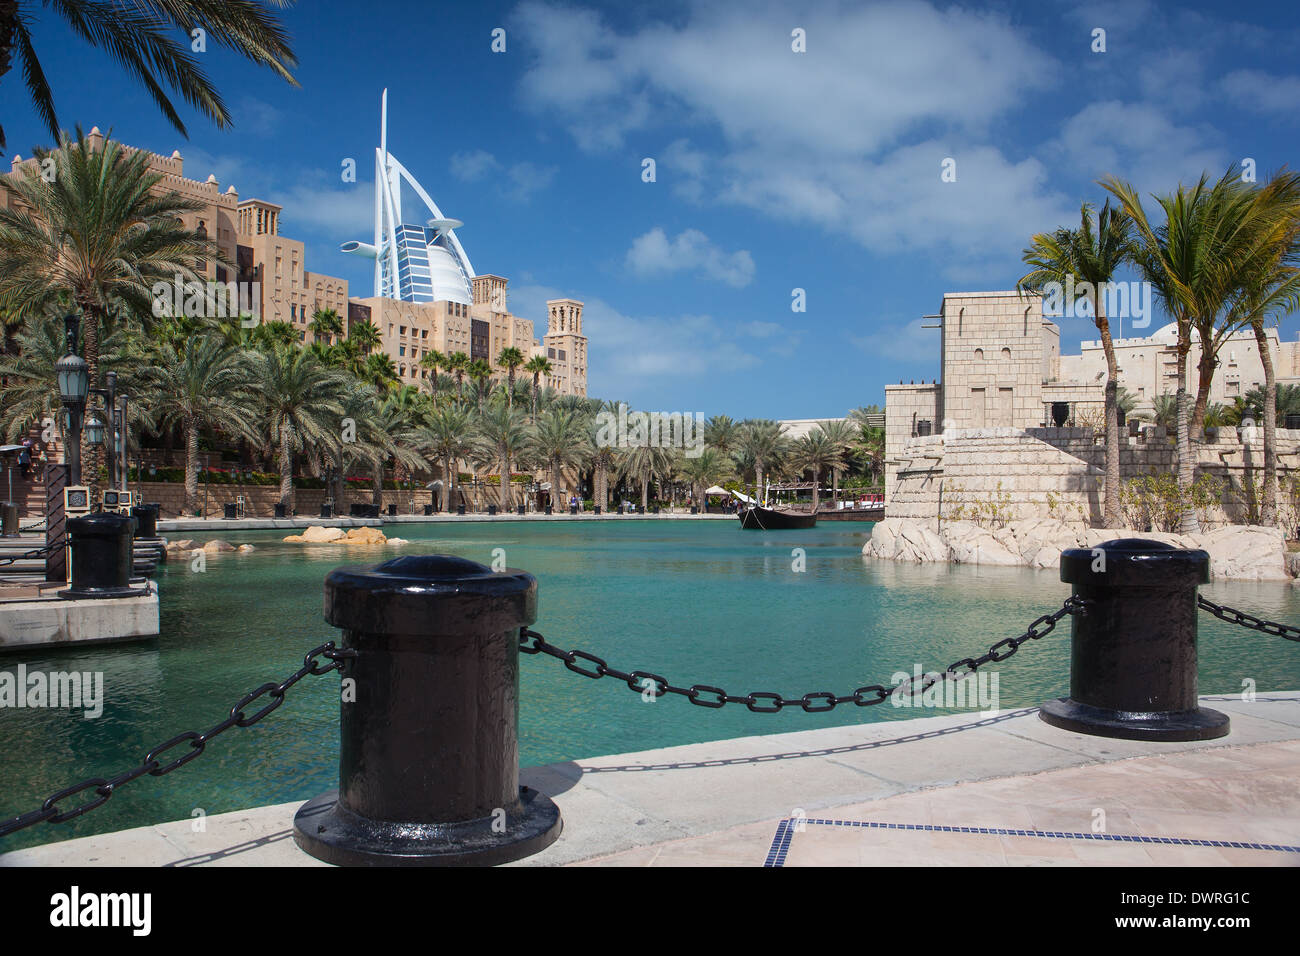 View of the Souk Madinat Jumeirah.Madinat Jumeirah contain two hotels and clusters of 29 typical Arabic houses. Stock Photo